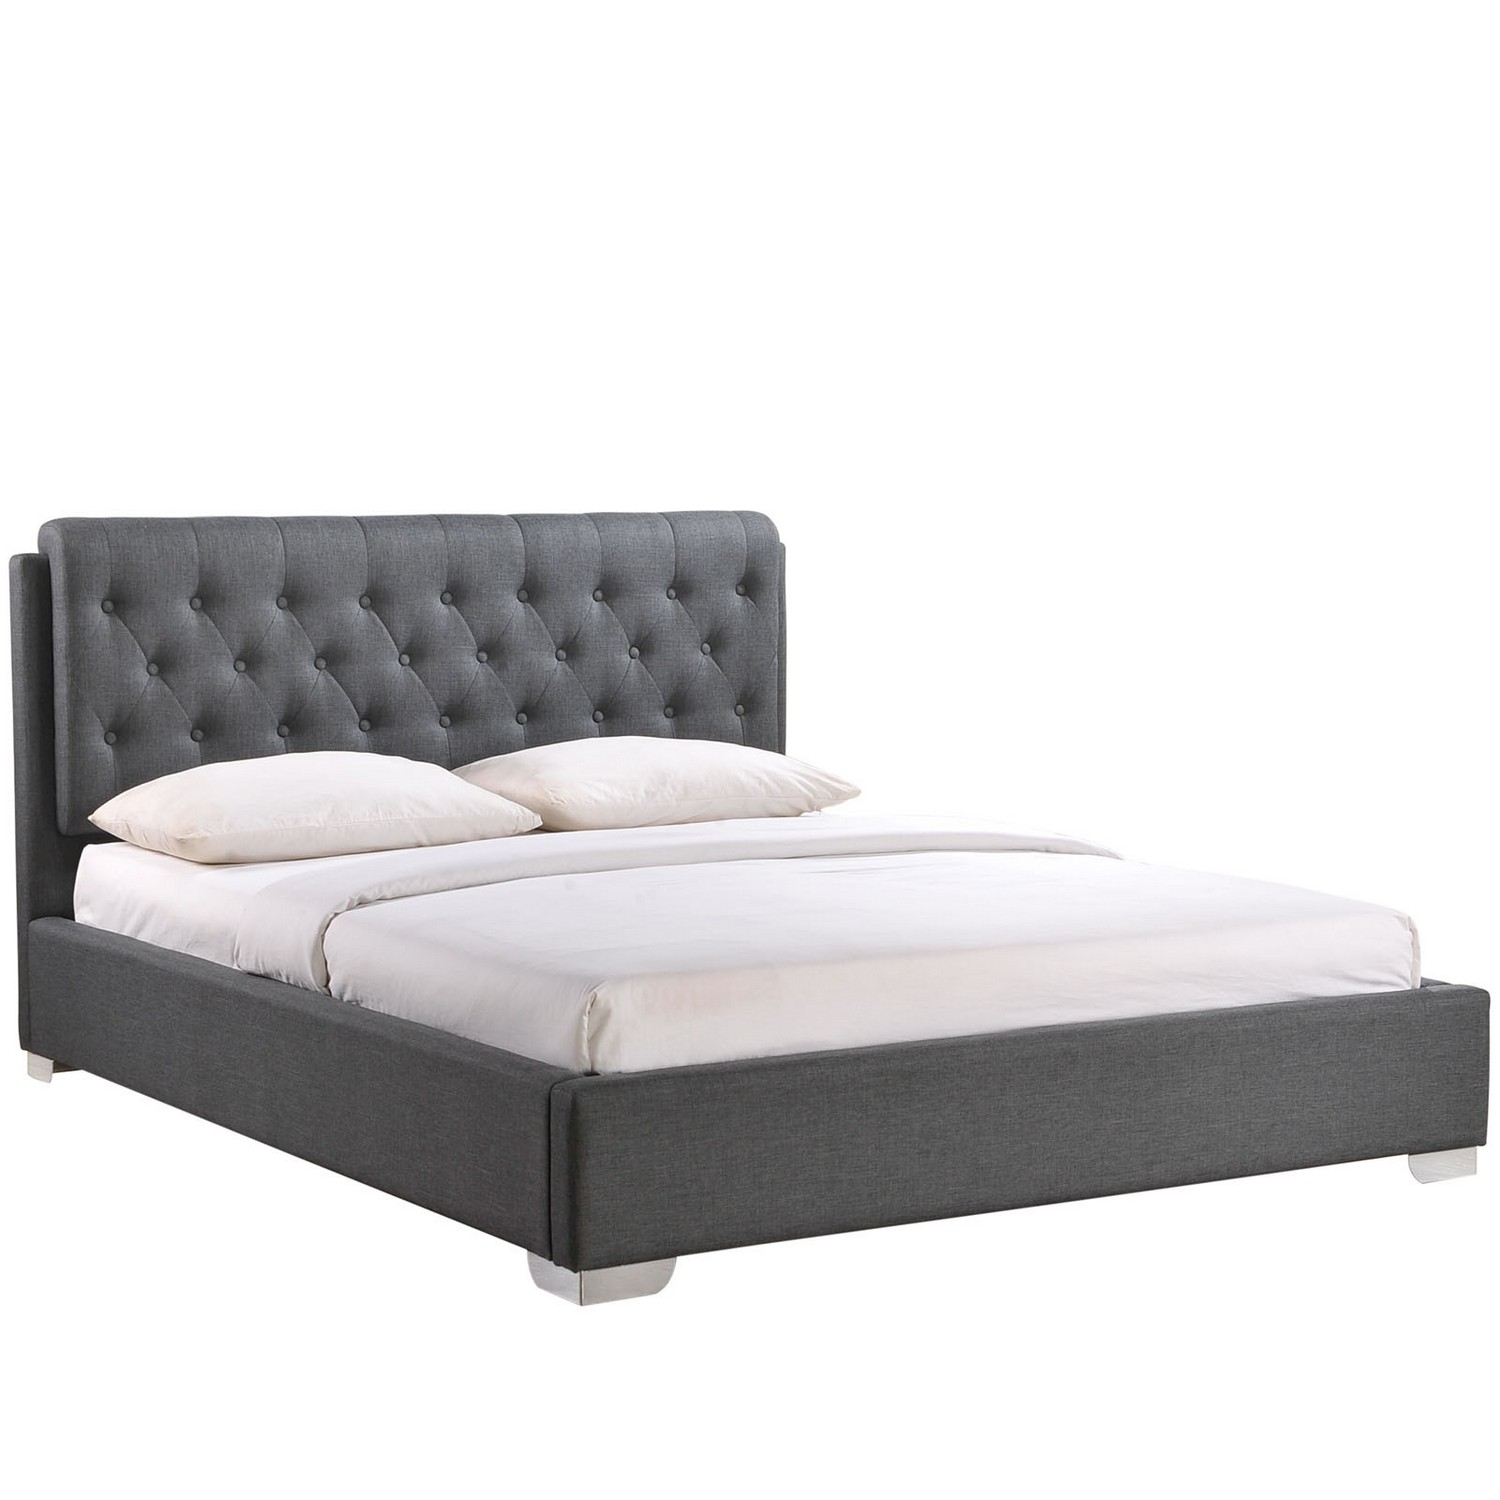 Modway Amelia Queen Fabric Bed - Gray